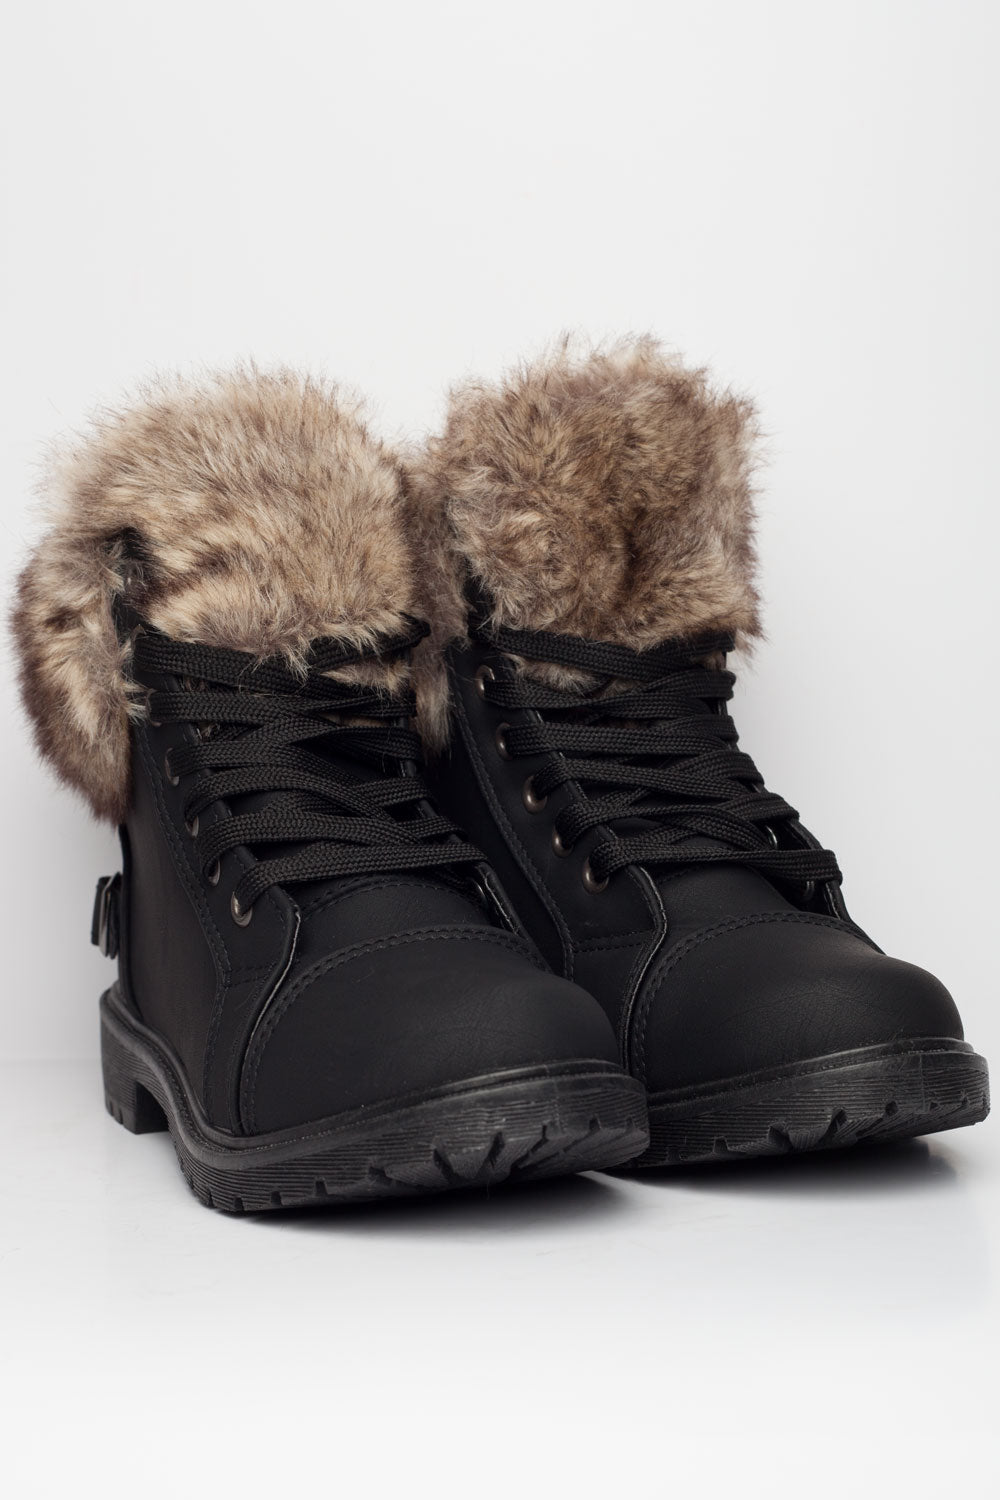 womens fur lined booties